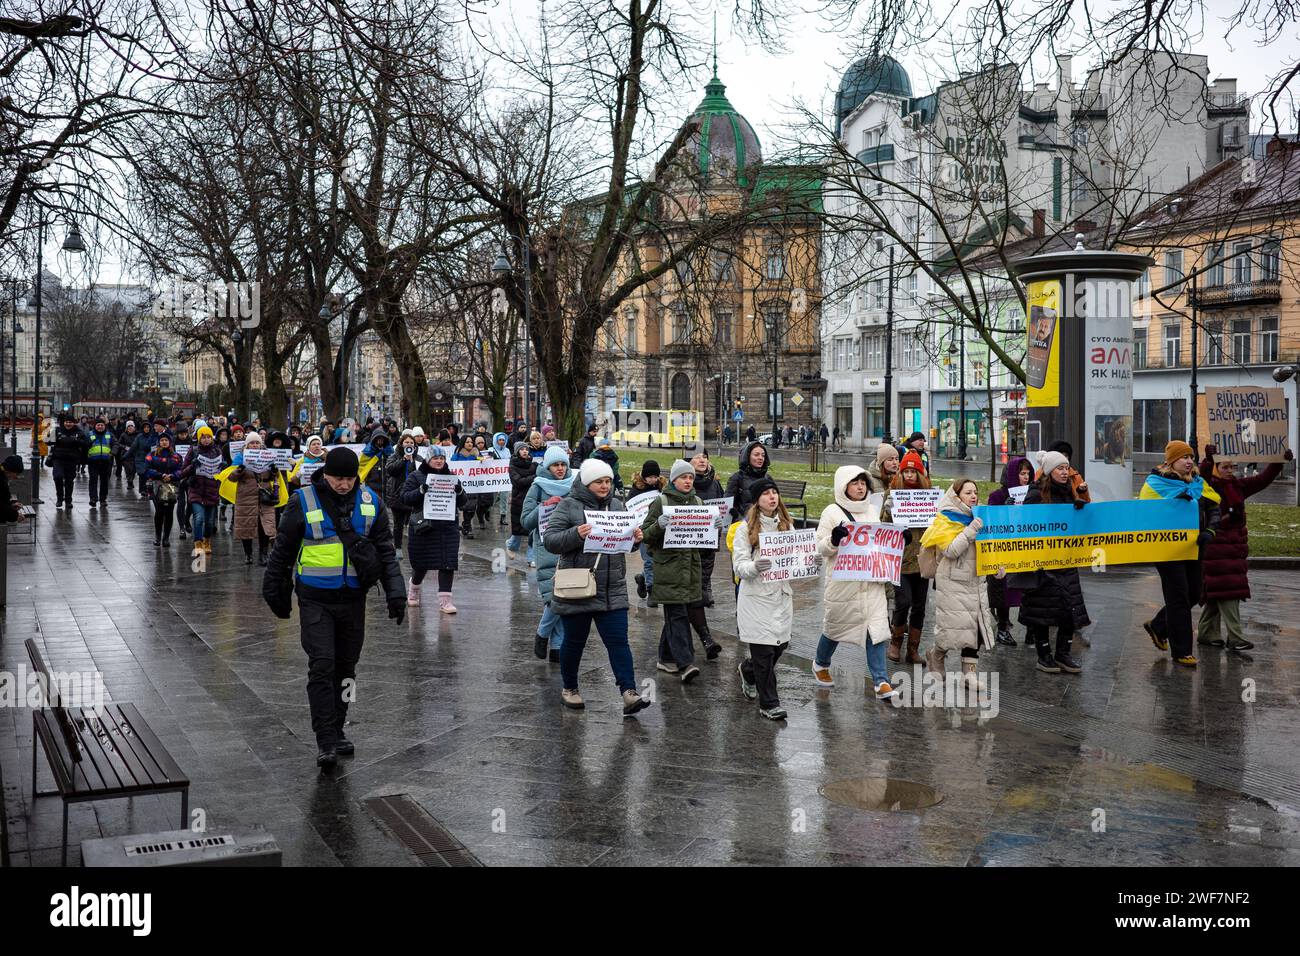 LVIV, UKRAINE - JANUARY 28, 2024 - Participants of a picket by military relatives demand the demobilization of soldiers after 18 months of service as they walk down the street, Lviv, western Ukraine. Stock Photo